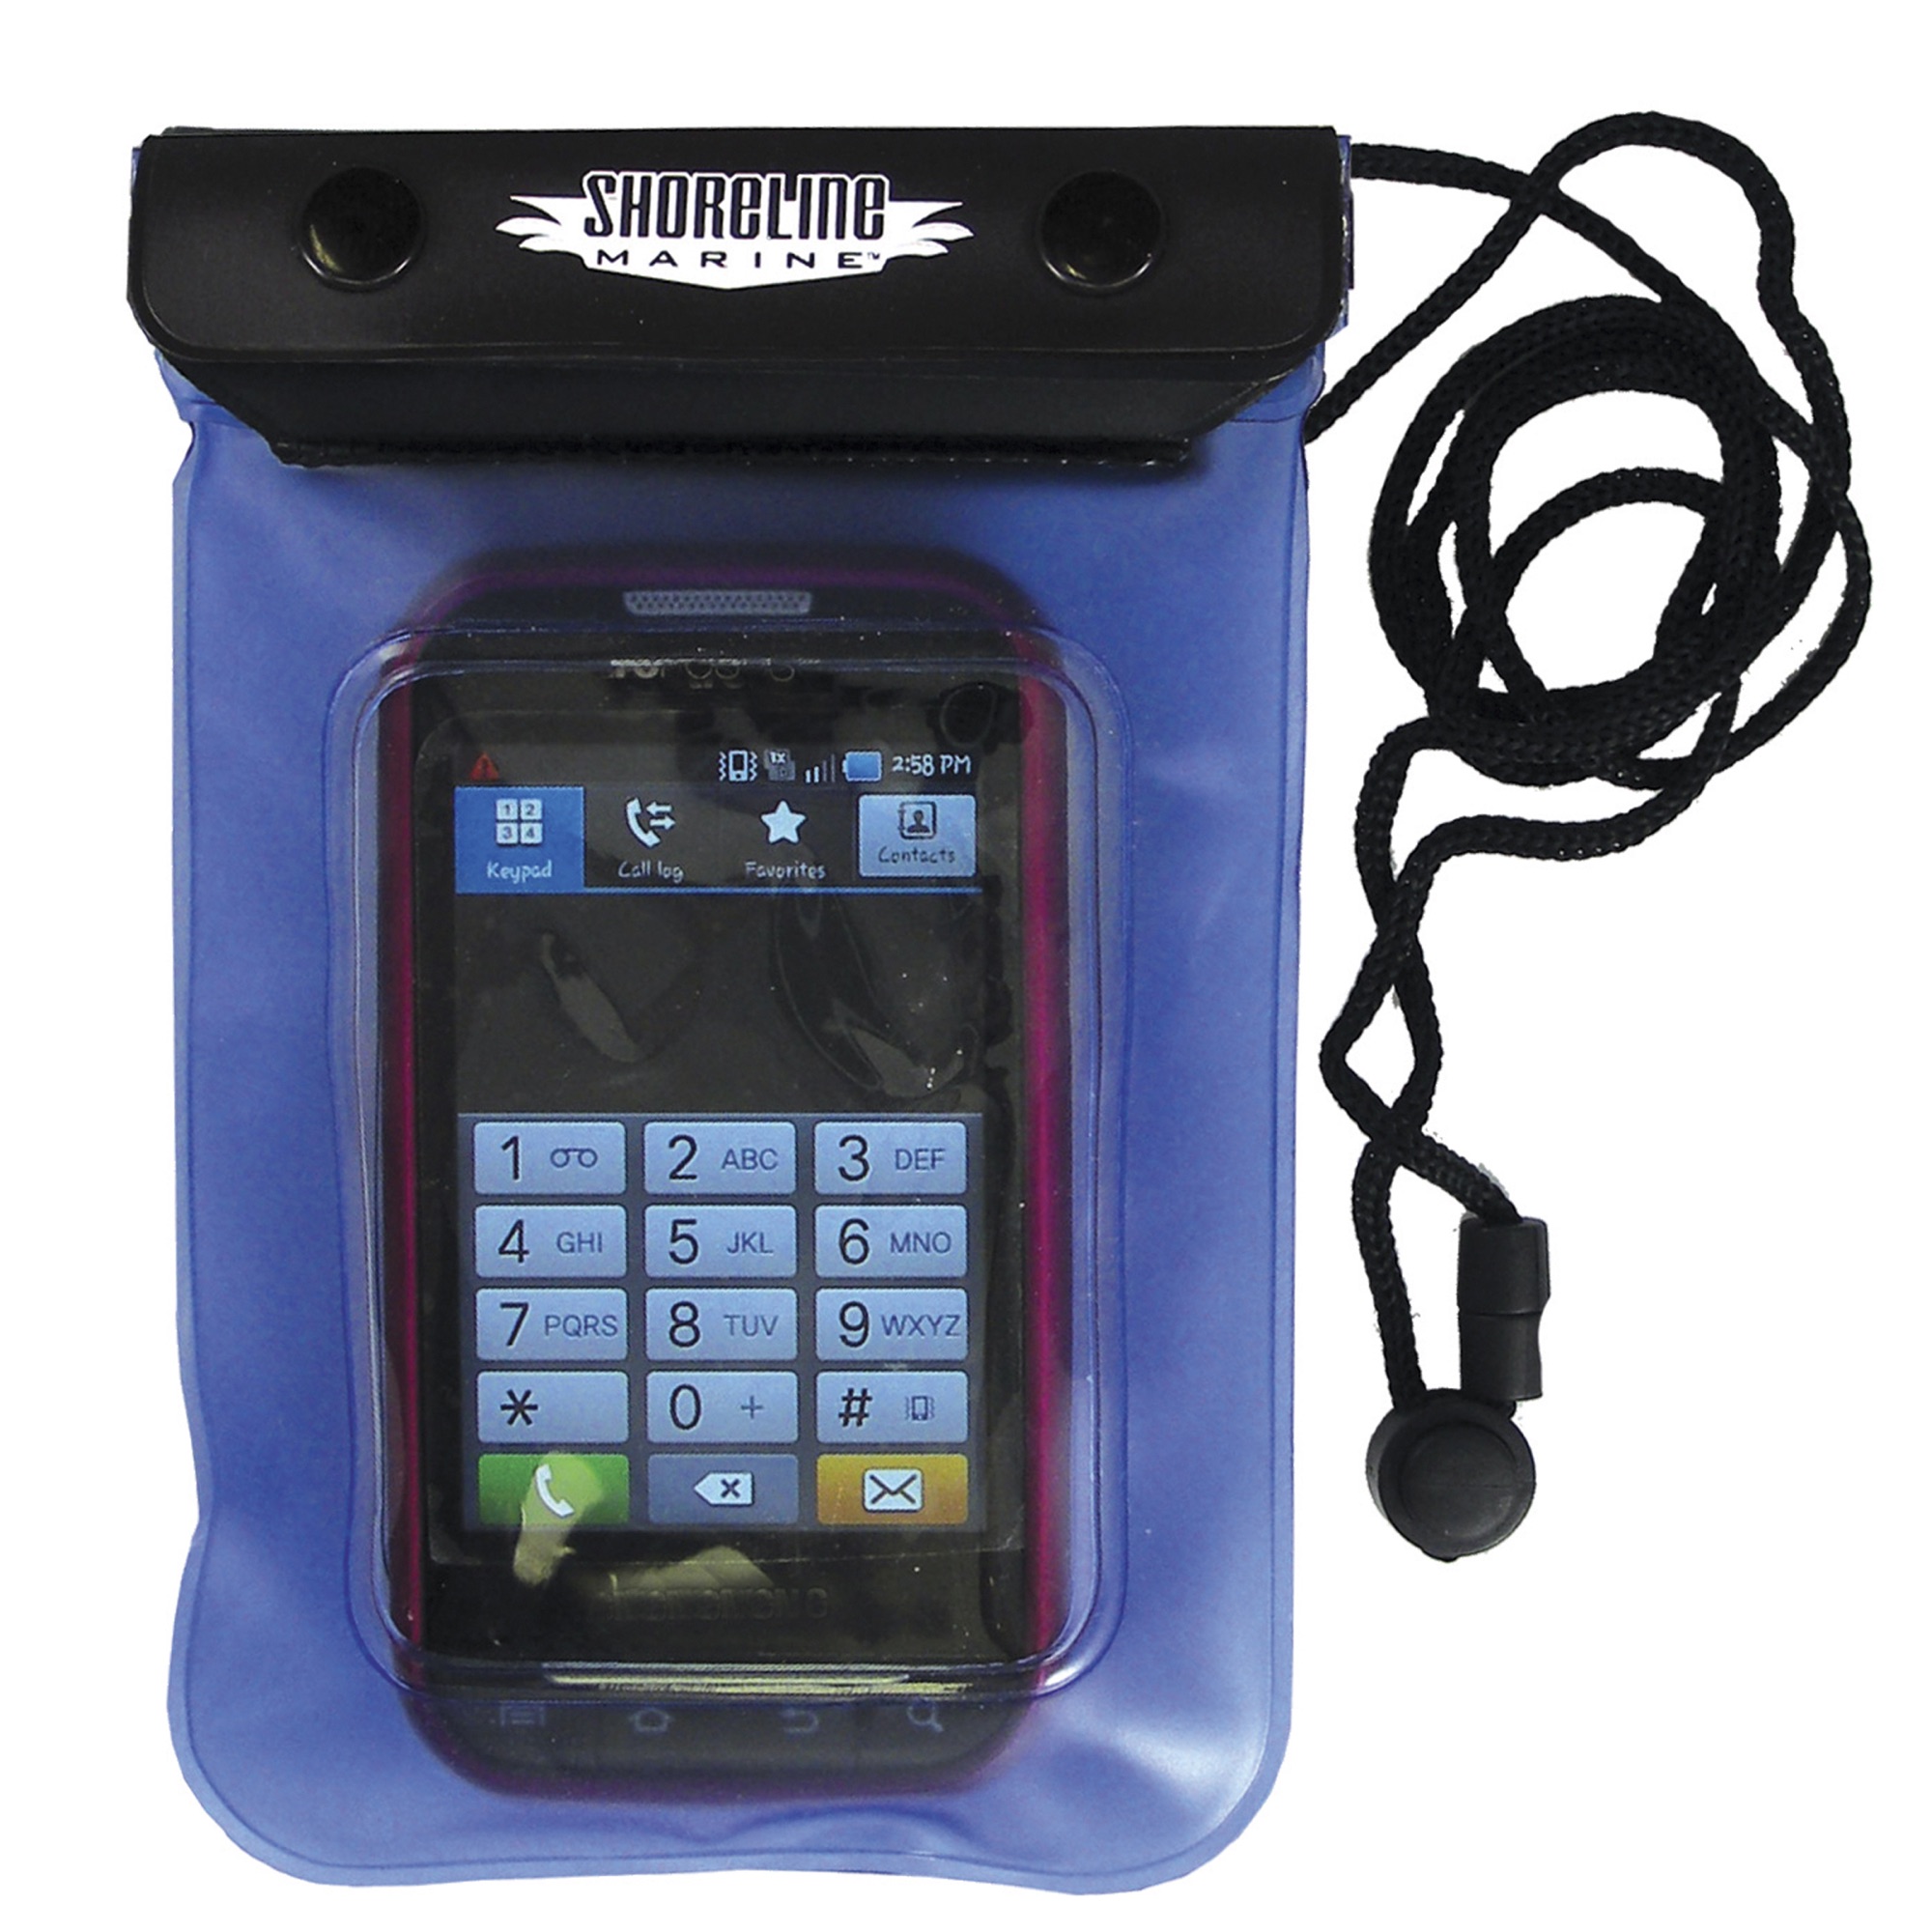 Shoreline Marine Waterproof Phone/Camera Dry Pouch, 4 2/5" x 6 2/5", Clear/Blue - image 1 of 4